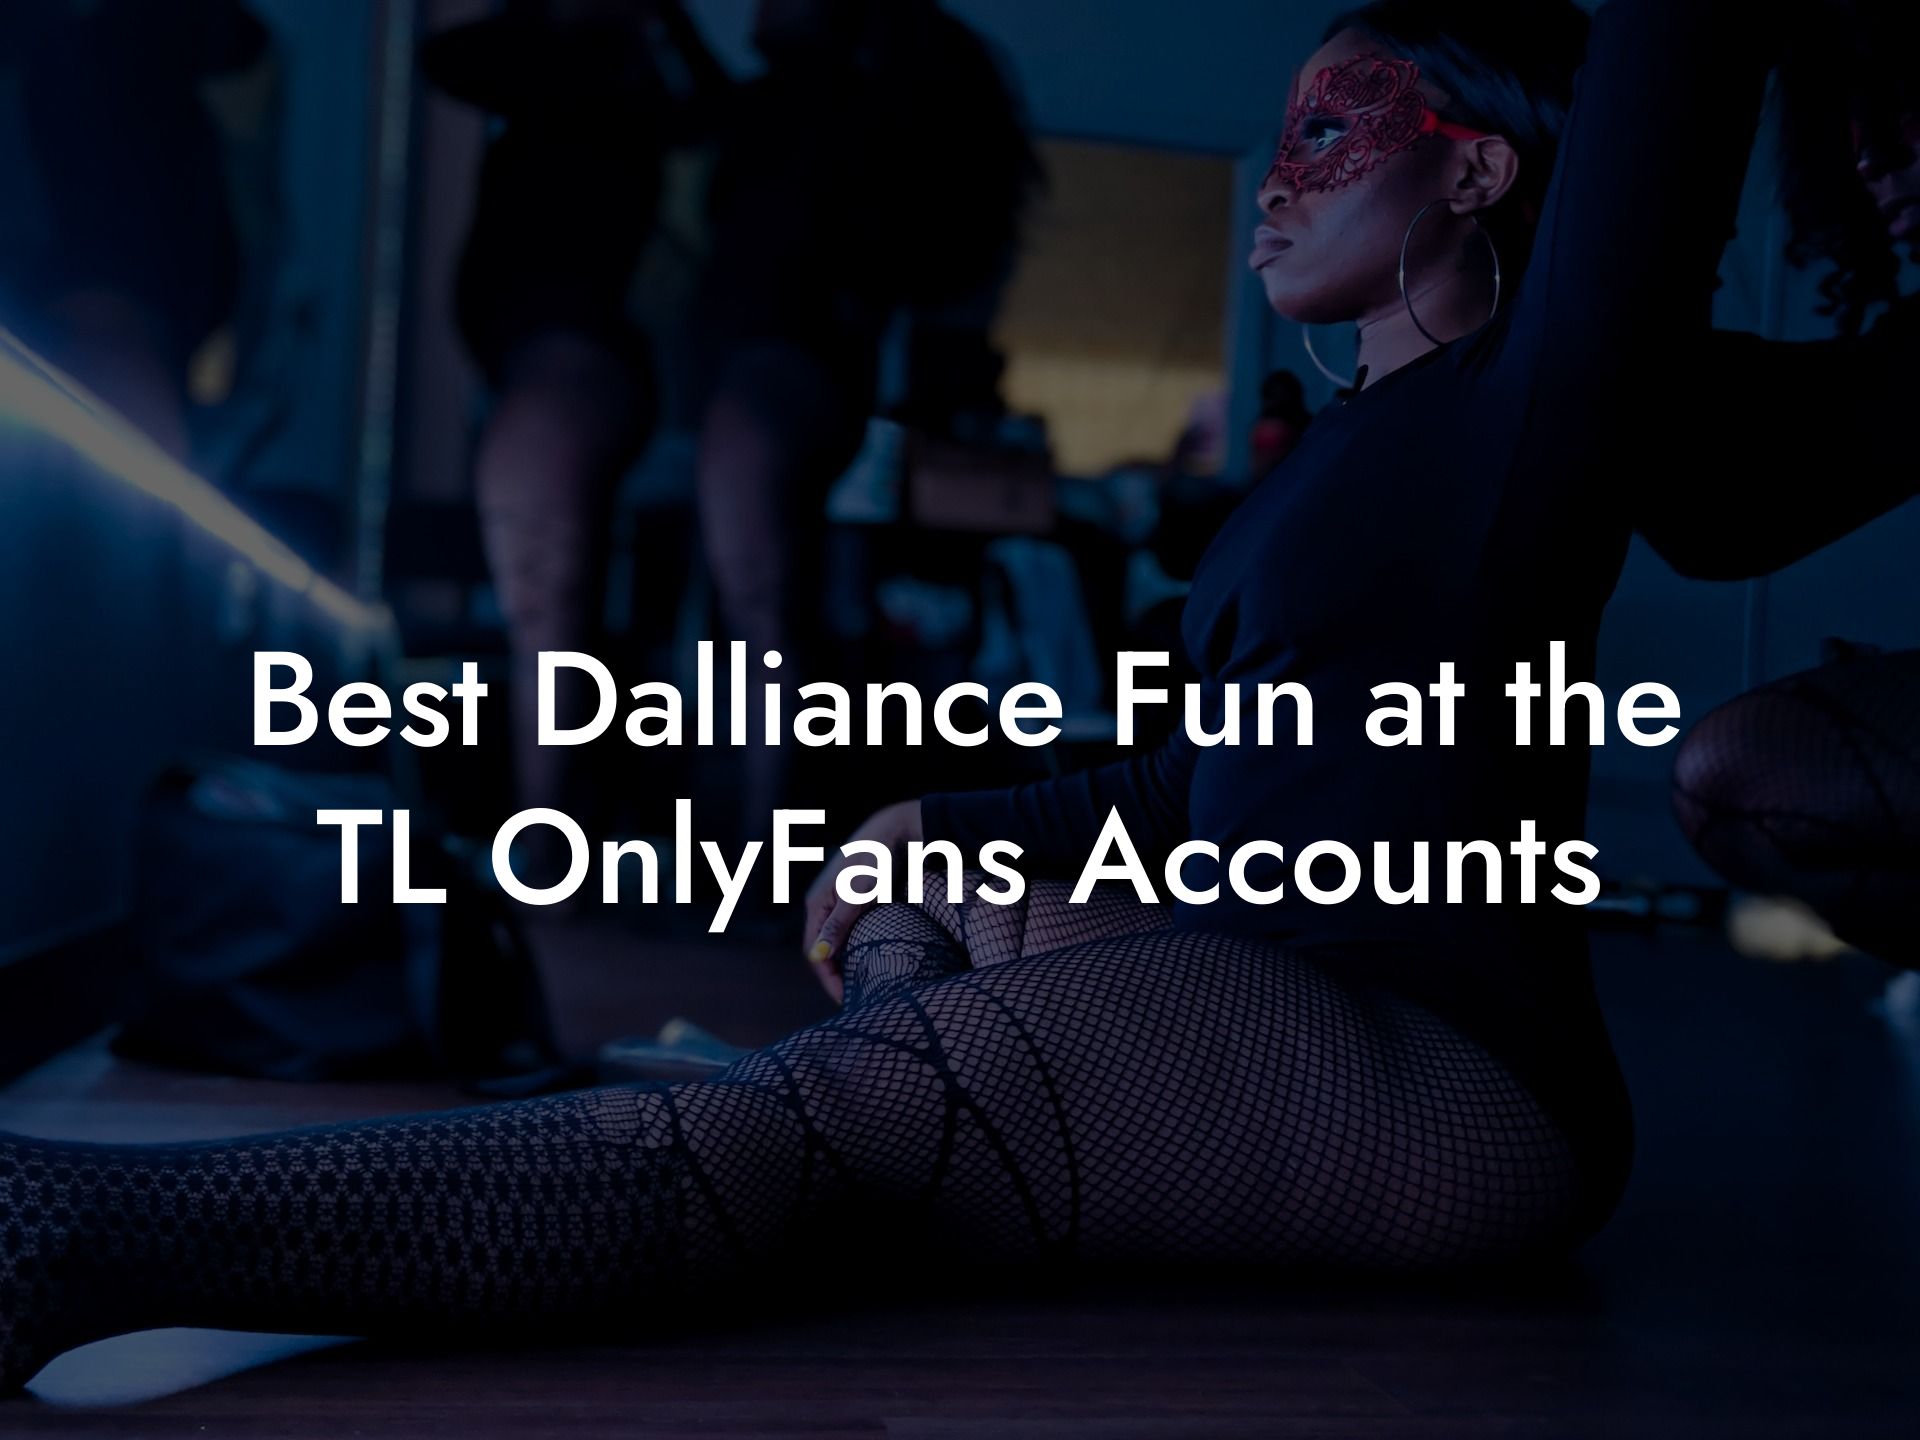 Best Dalliance Fun at the TL OnlyFans Accounts